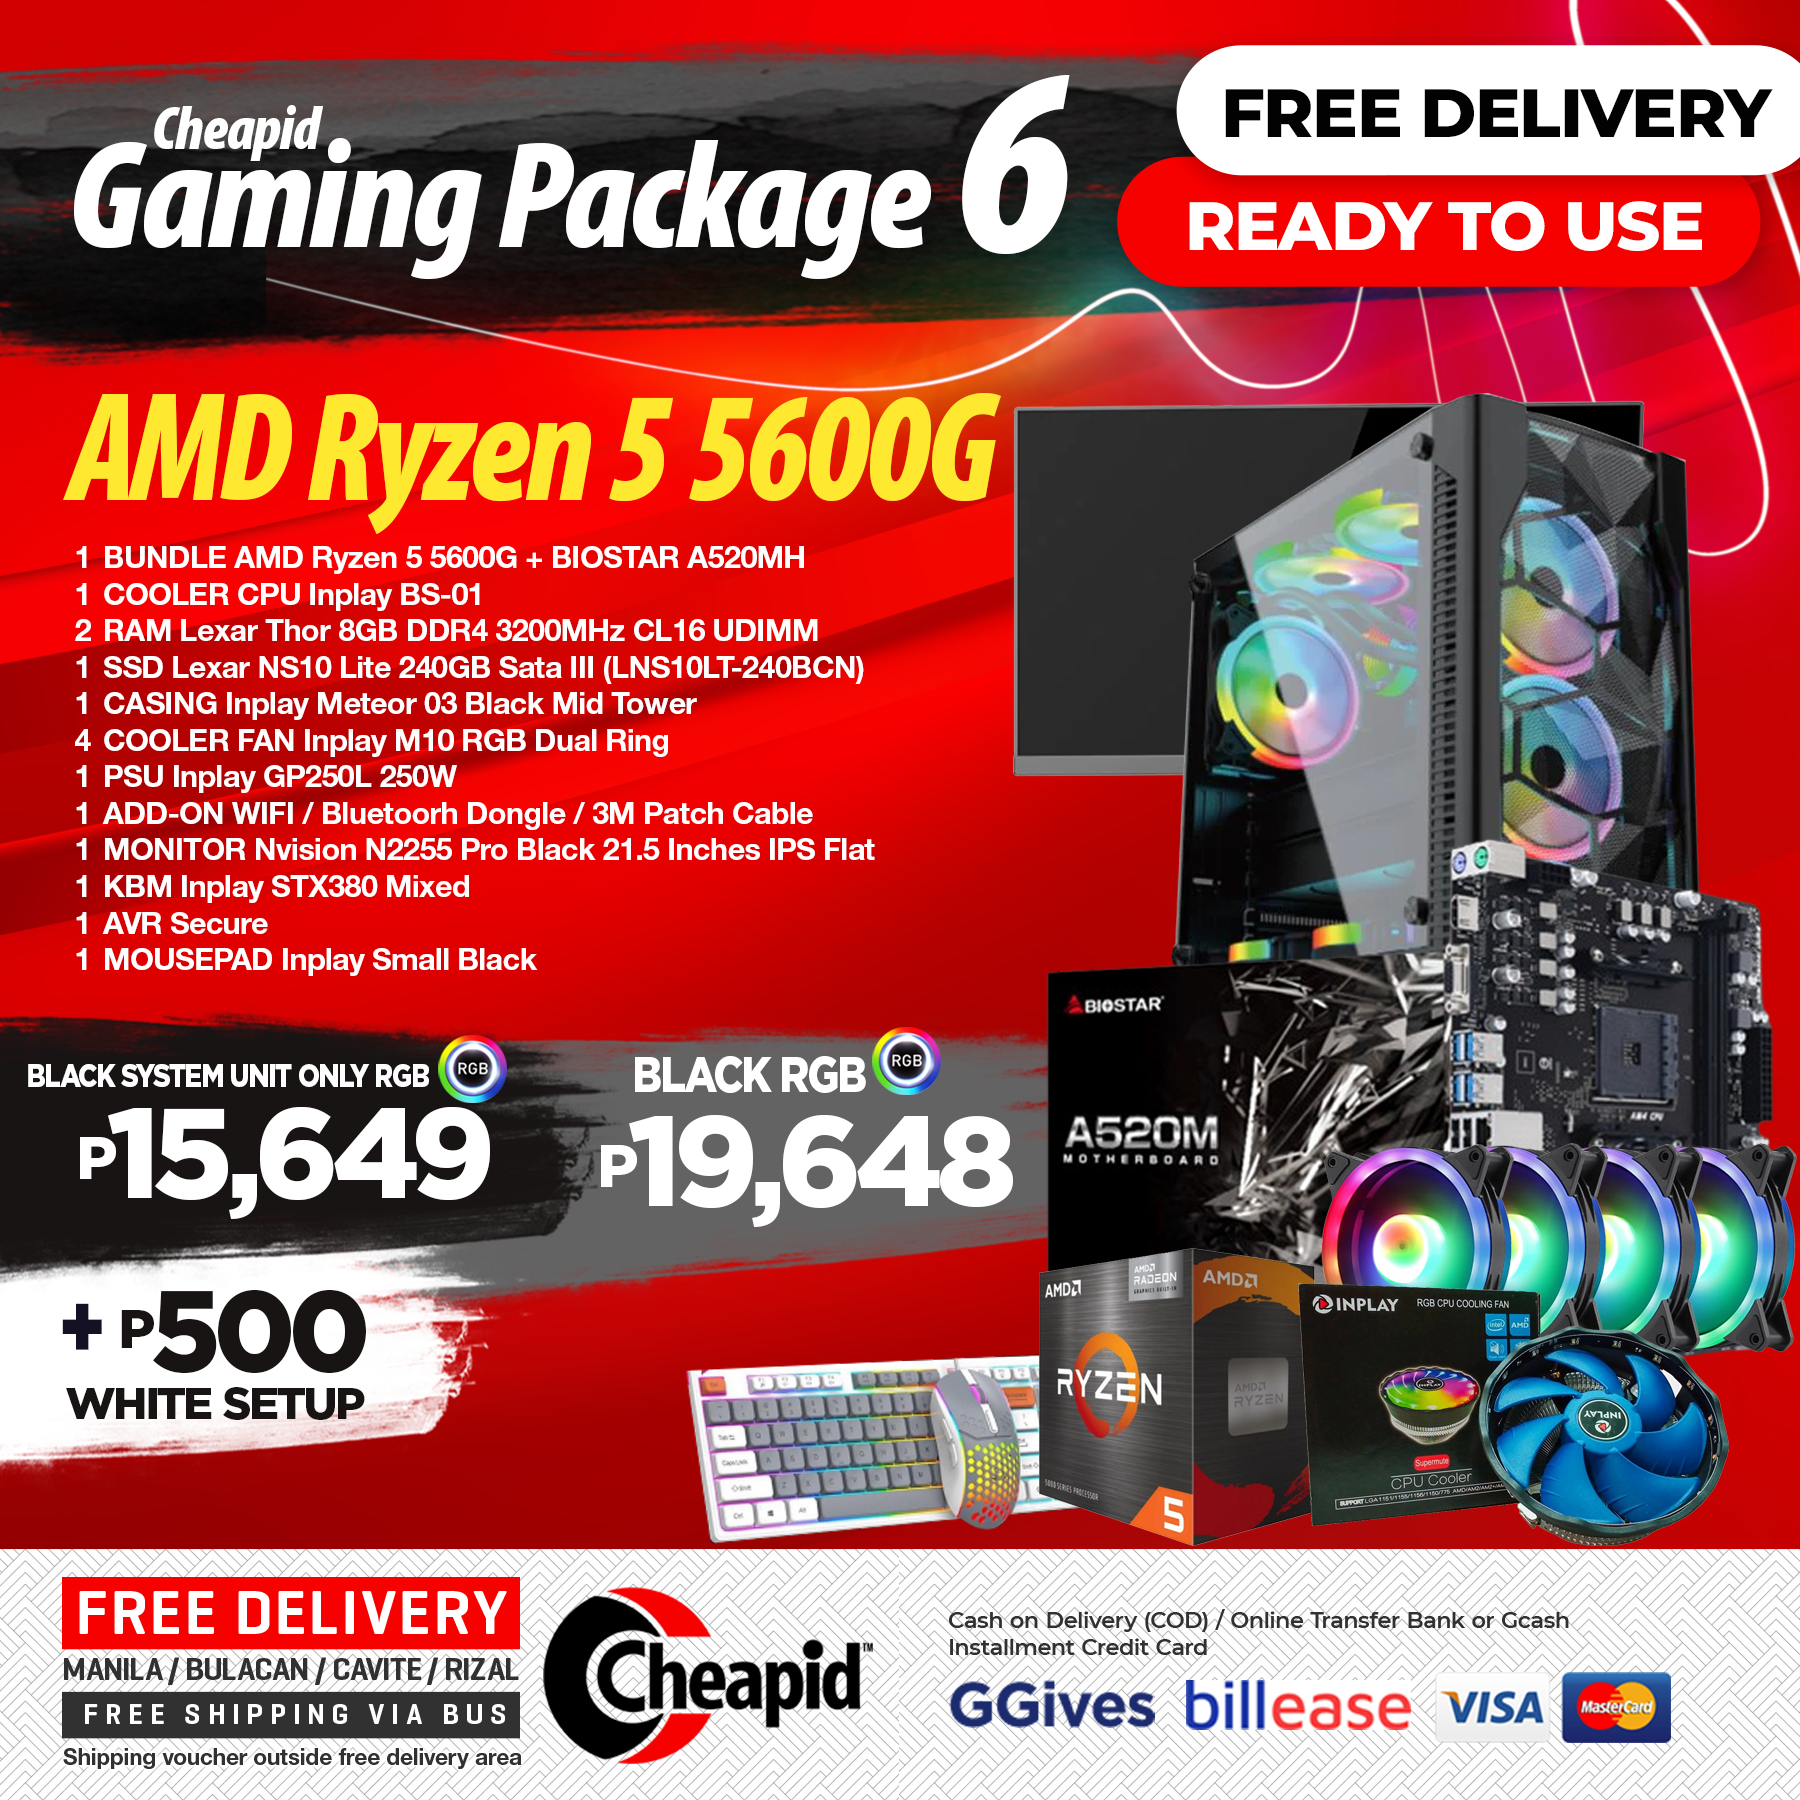 Cheapid Gaming Package - Classic Setup 06